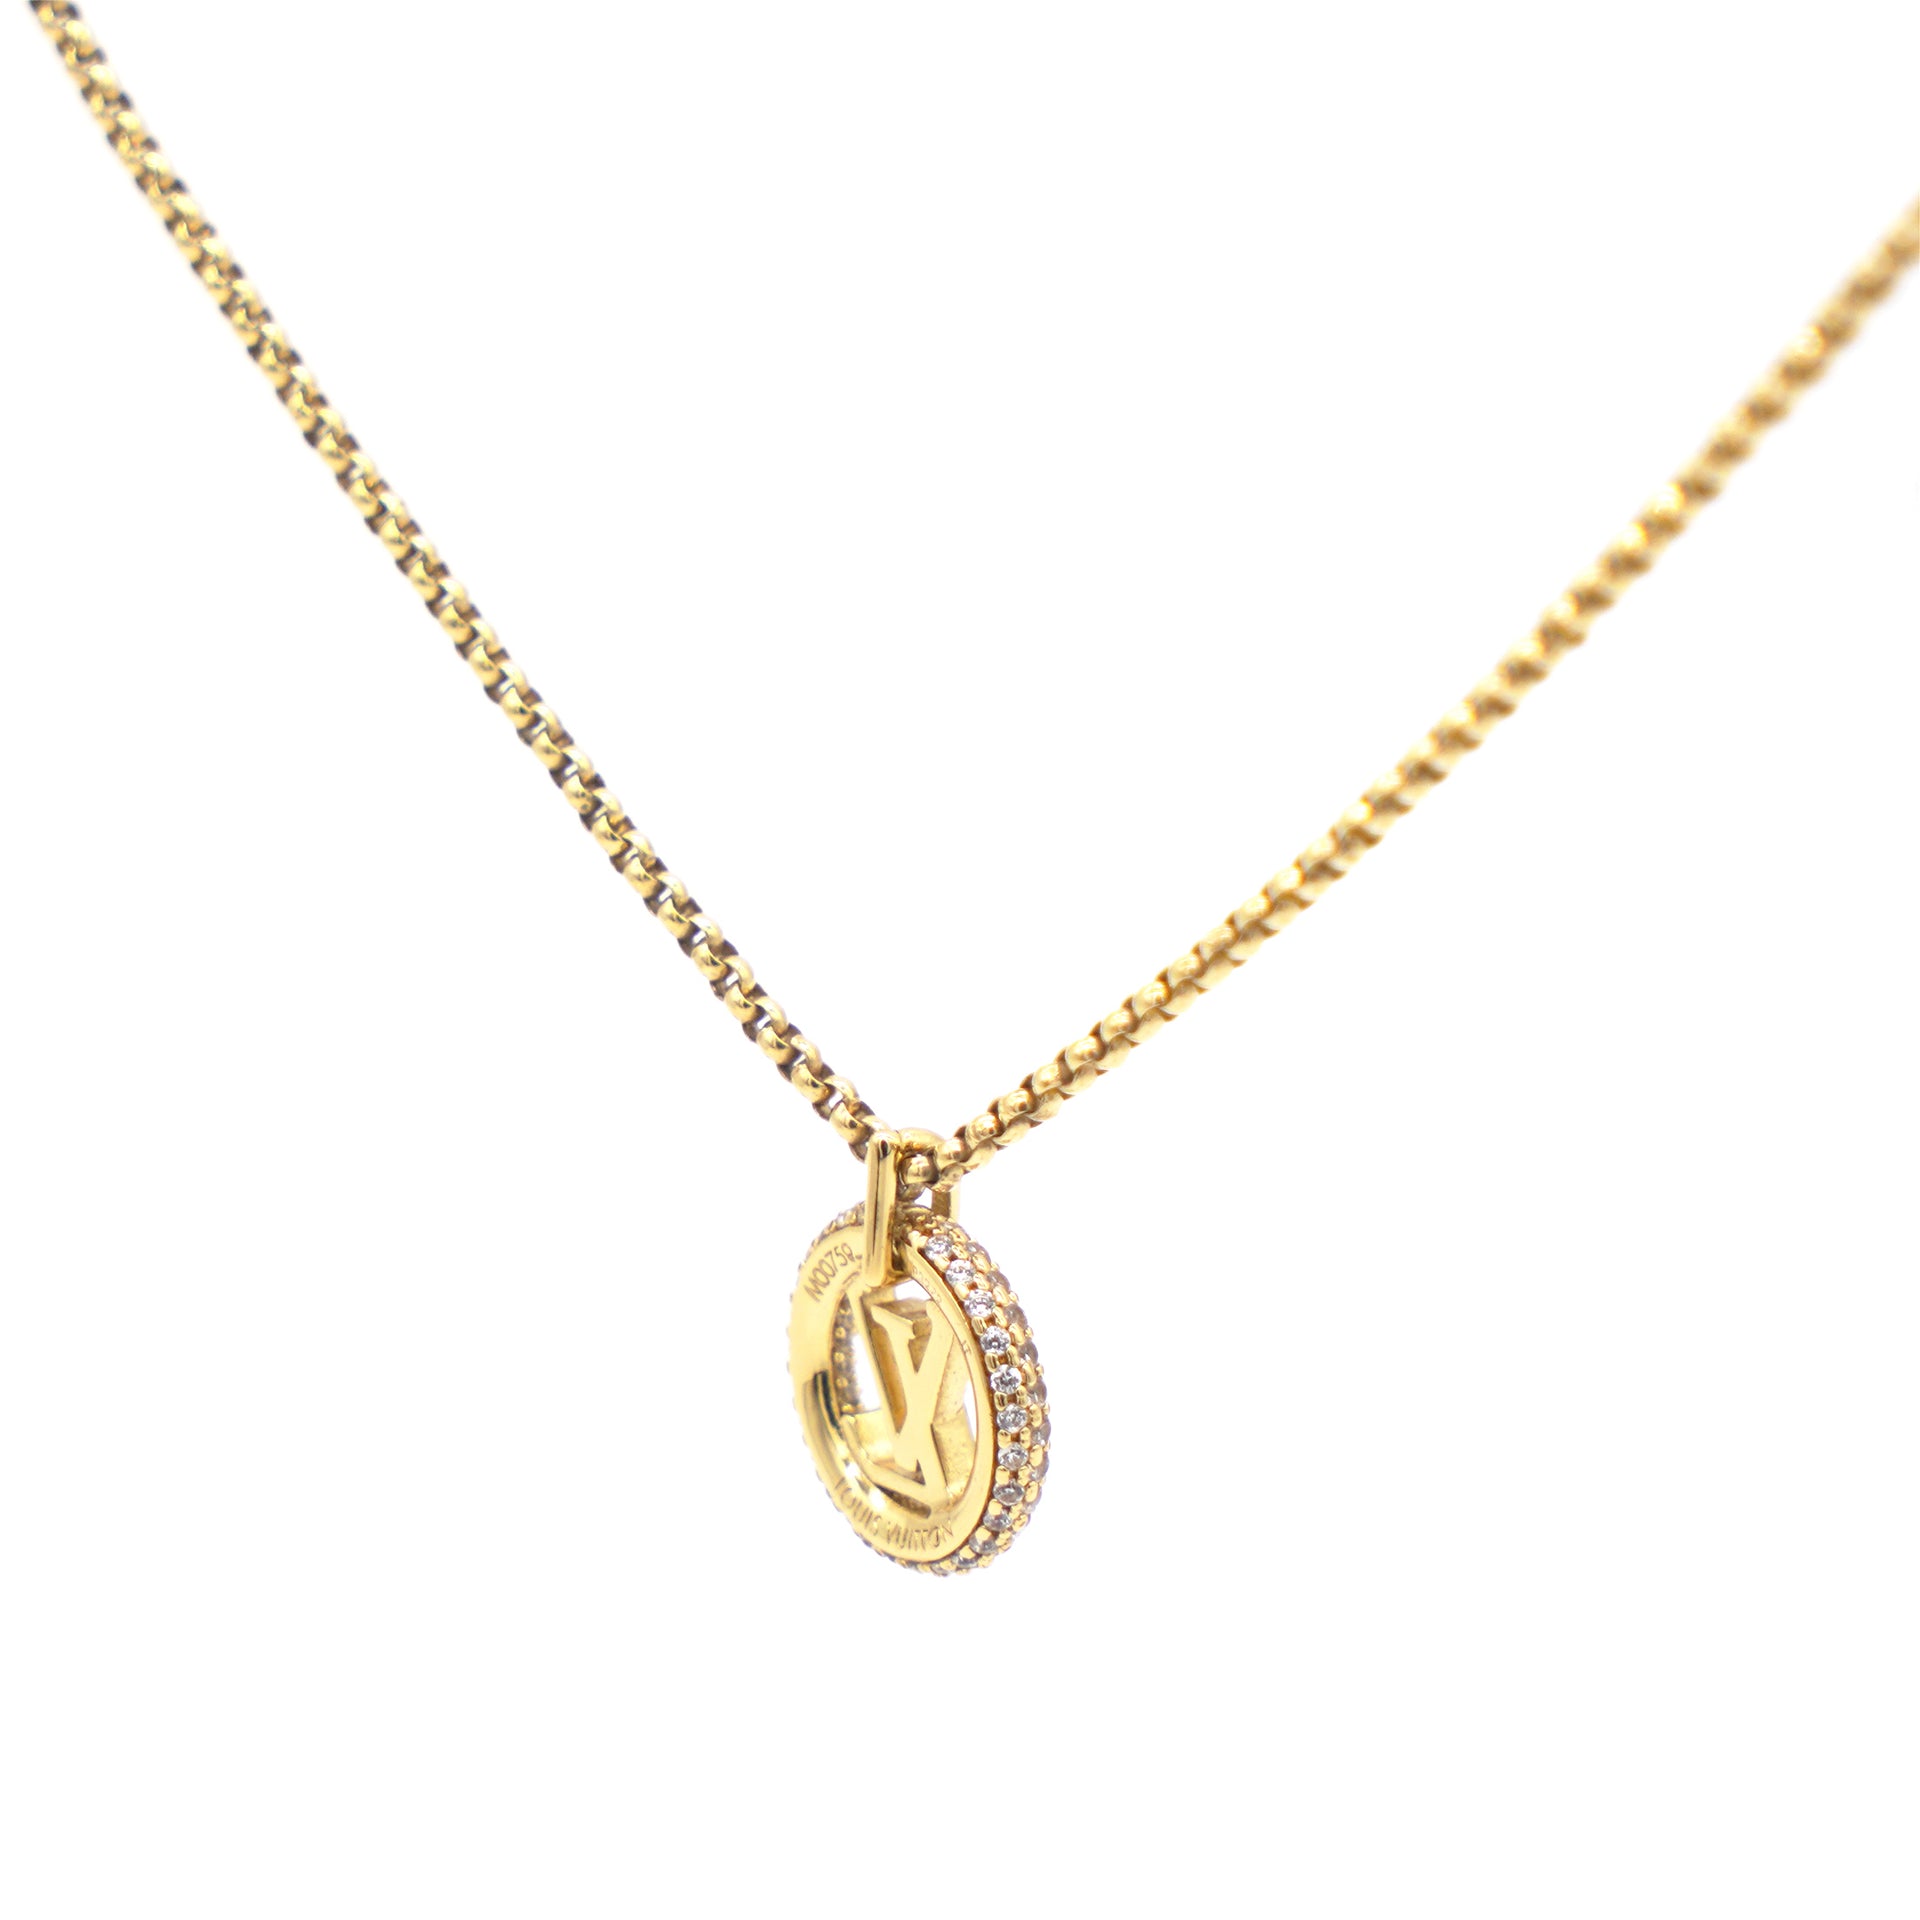 Louise By Night Necklace Gold For Women - Clothingta